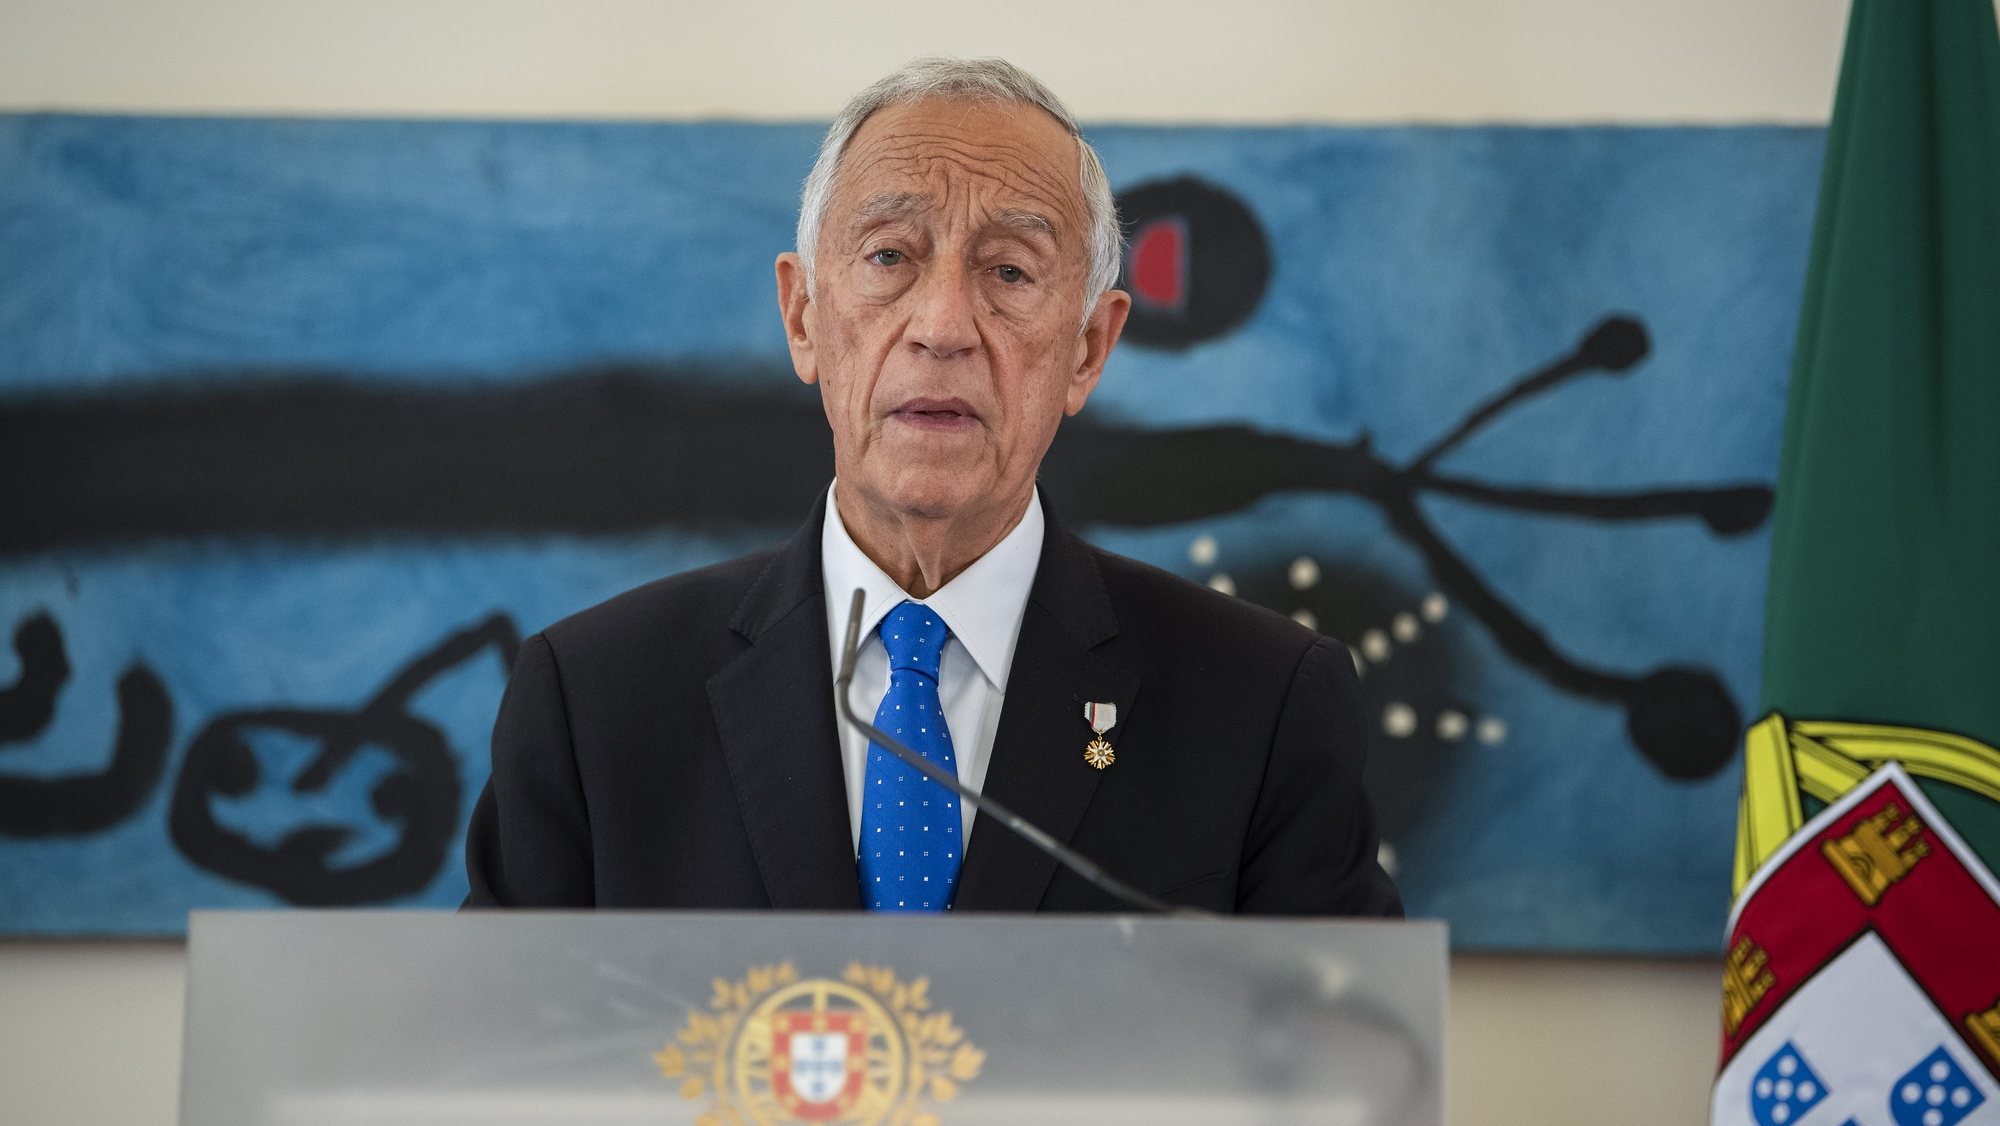 Portugal&#039;s President Marcelo Rebelo de Sousa (R) accompanied by Bulgaria&#039;s President Rumen Radev (not in the picture) during a press conference following the visit to Serralves Museum, Porto, Portugal, 12 April 2022. The President of the Republic of Bulgaria will pay an official visit to Portugal on Tuesday and Wednesday, starting in Porto. RUI MANUEL FARINHA/LUSA